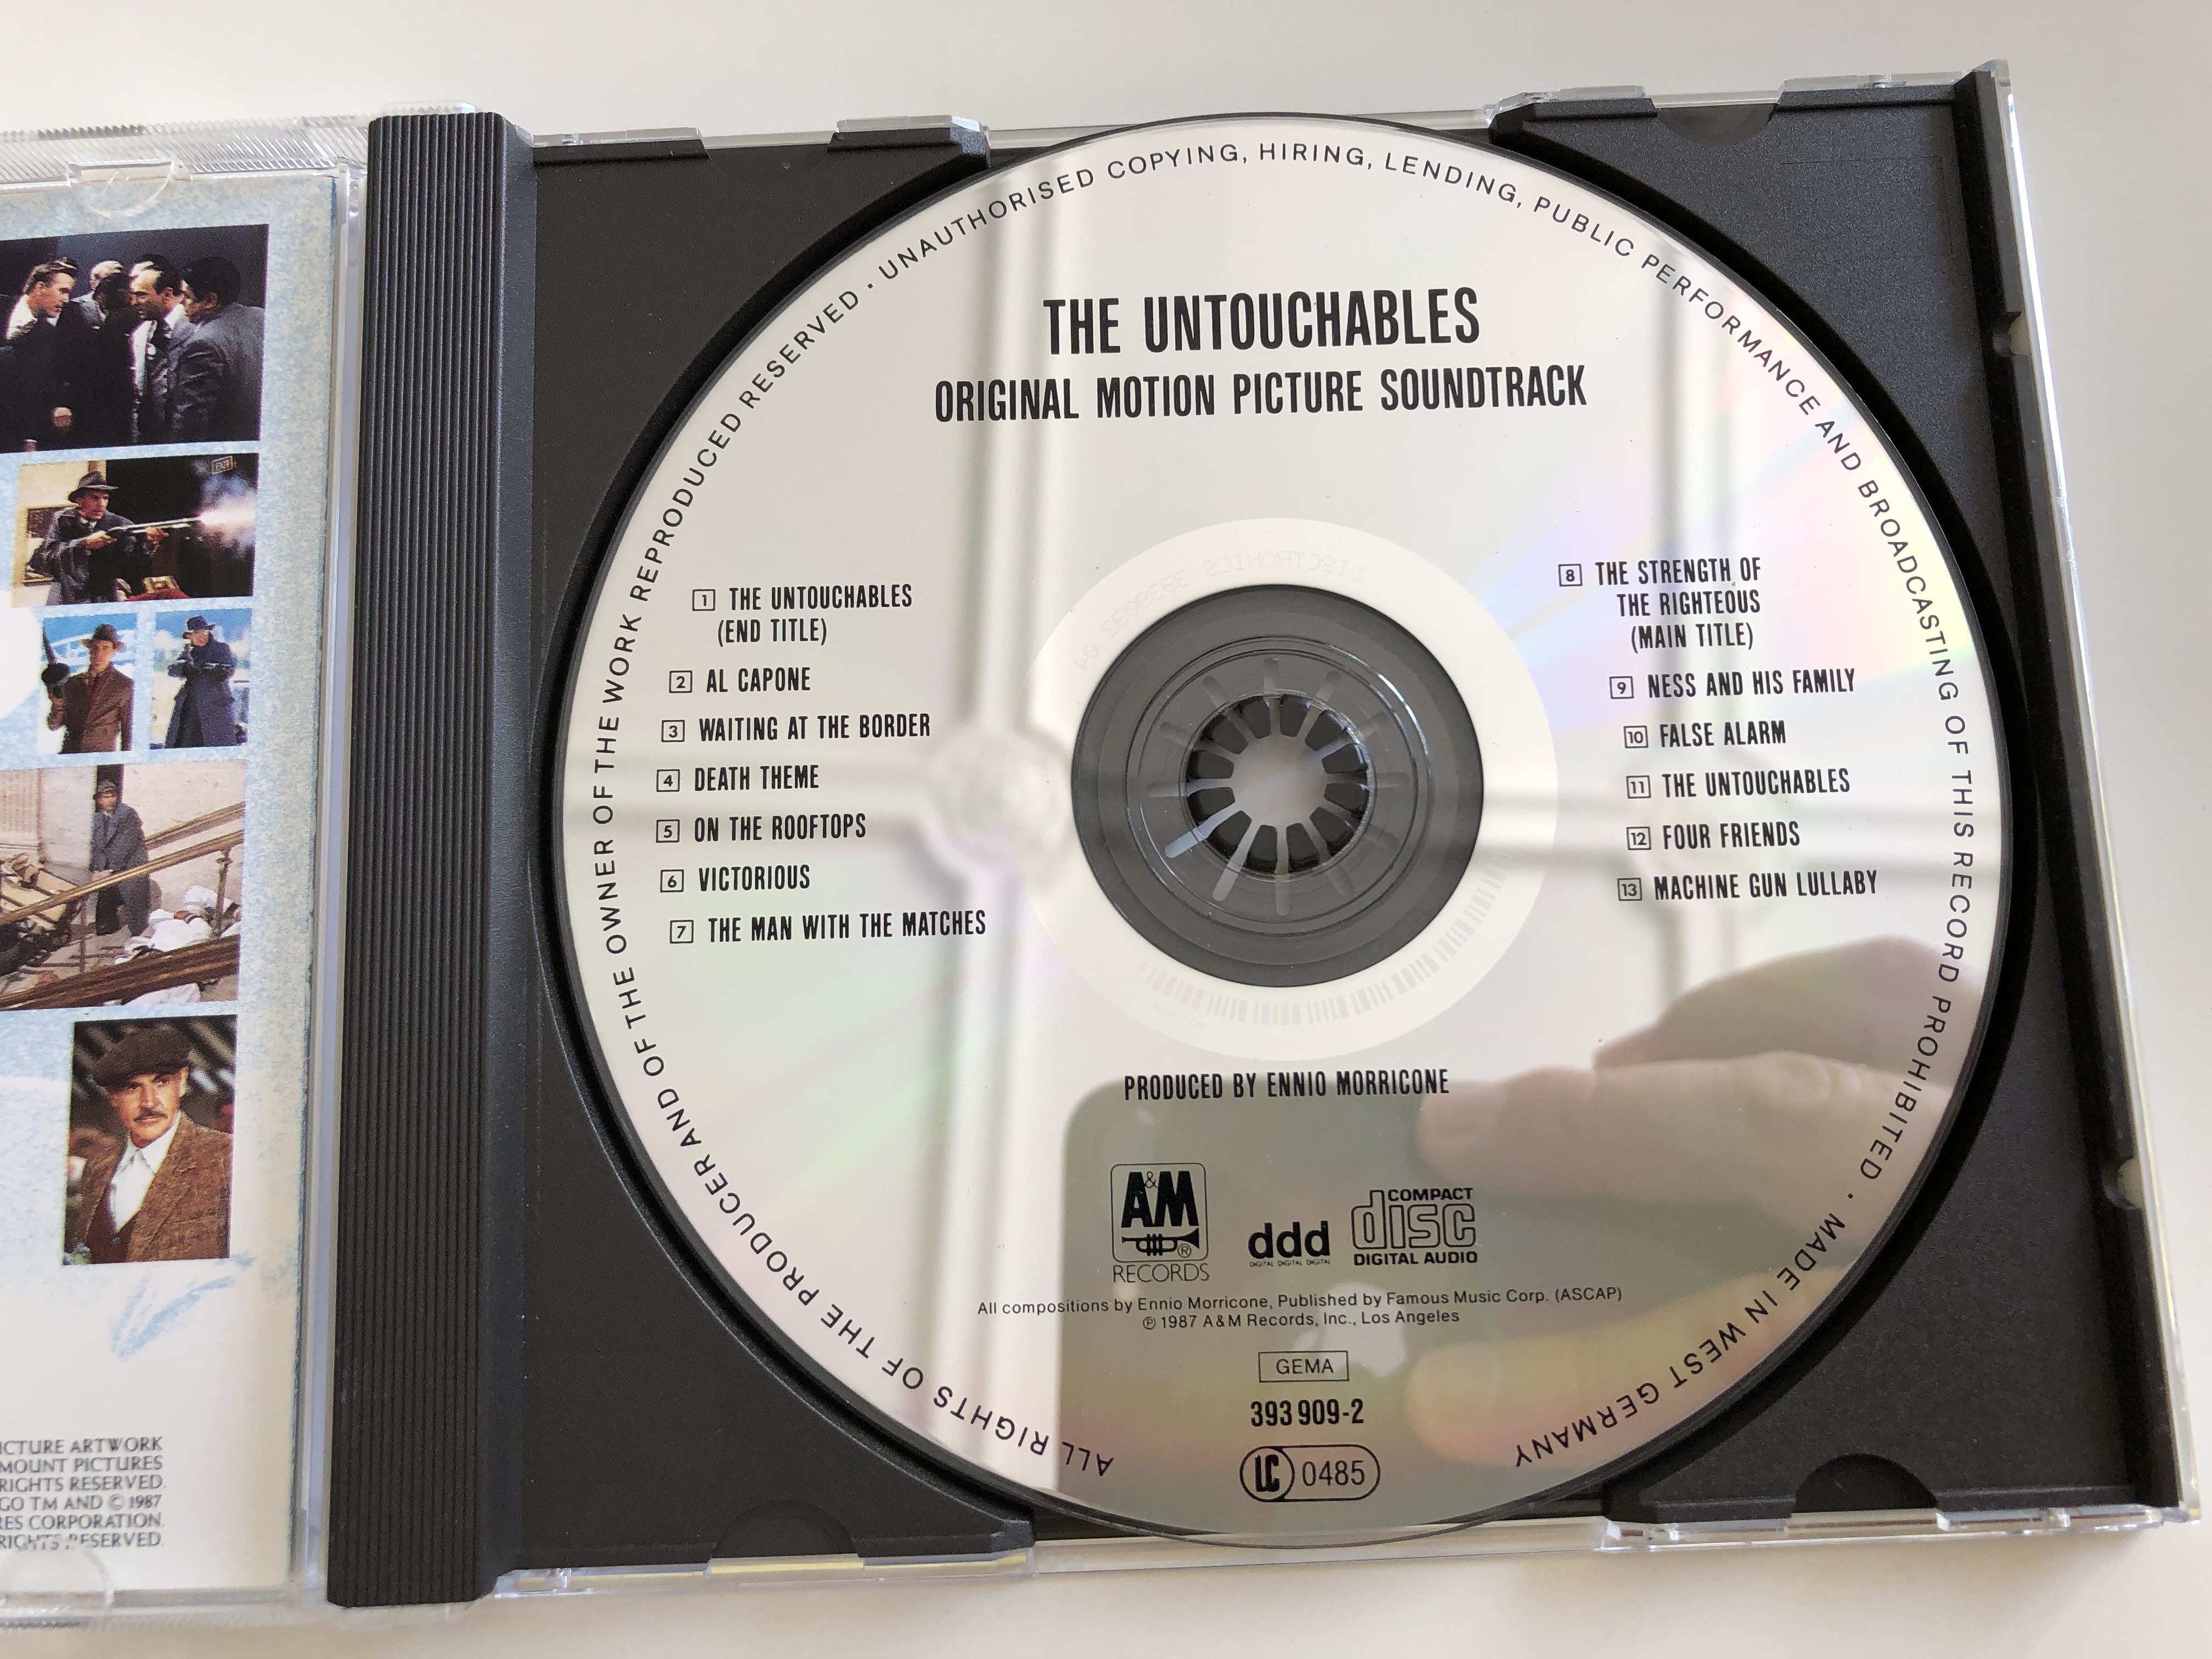 the-untouchables-original-motion-picture-soundtrack-music-composed-orchestrated-conducted-by-ennio-morricone-audio-cd-1987-a-m-records-393-909-2-5-.jpg